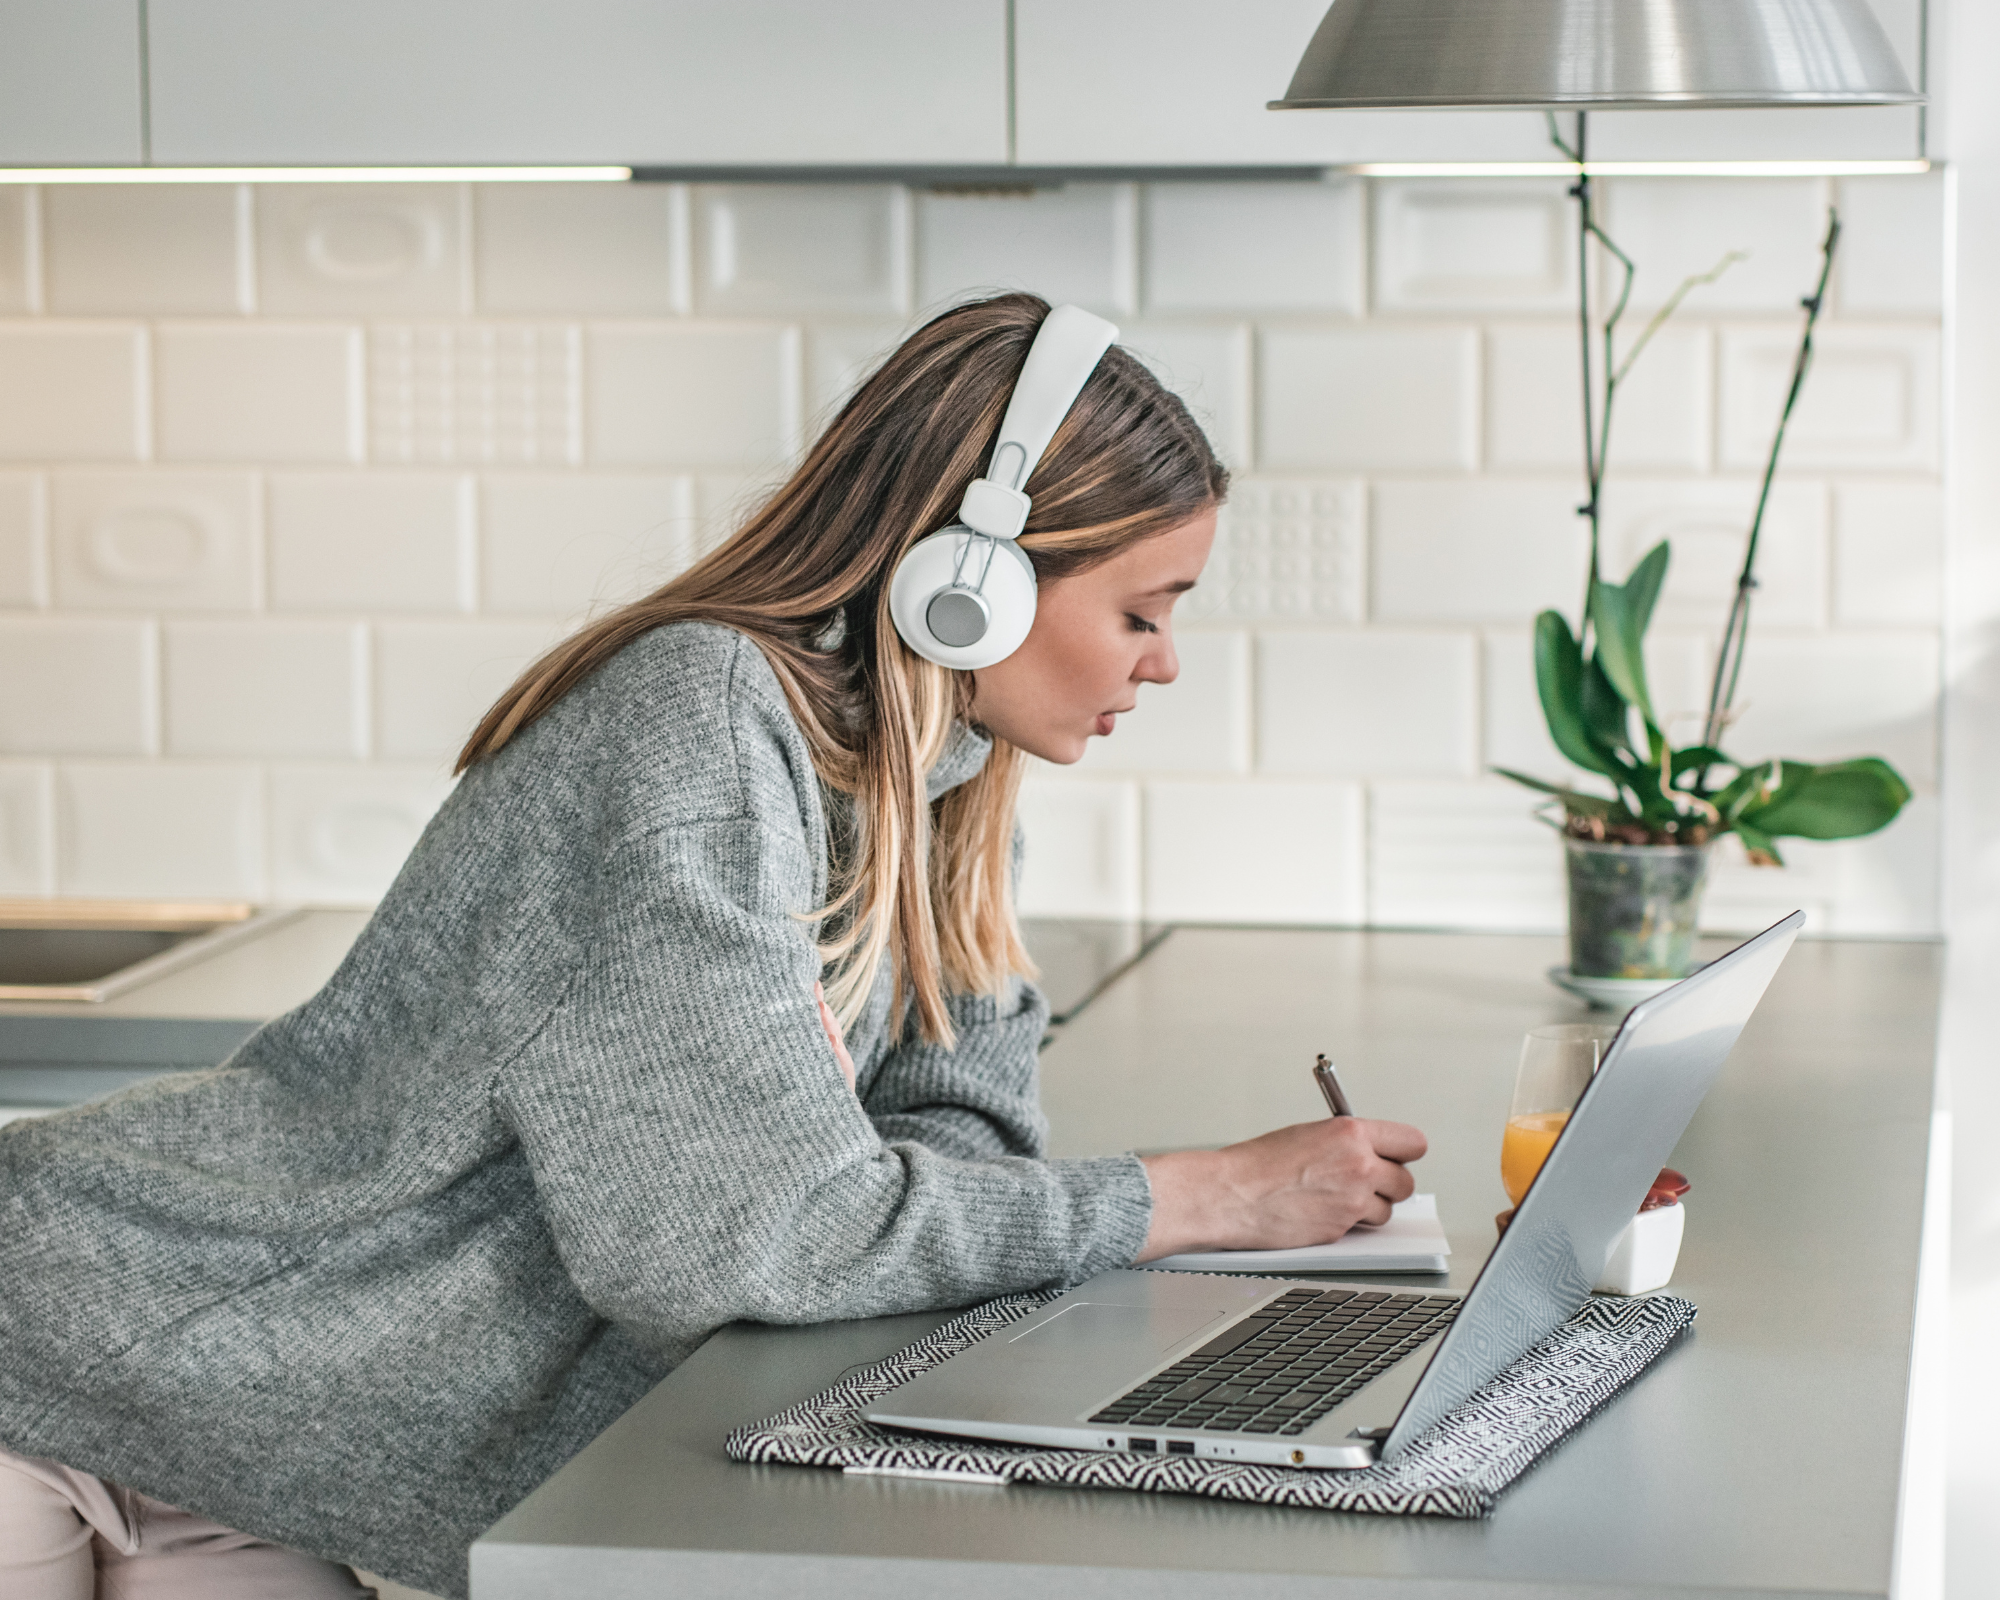 Woman leaning on the counter writing notes with headphones on and an open laptop in front of her. Best online baby sleep training certification